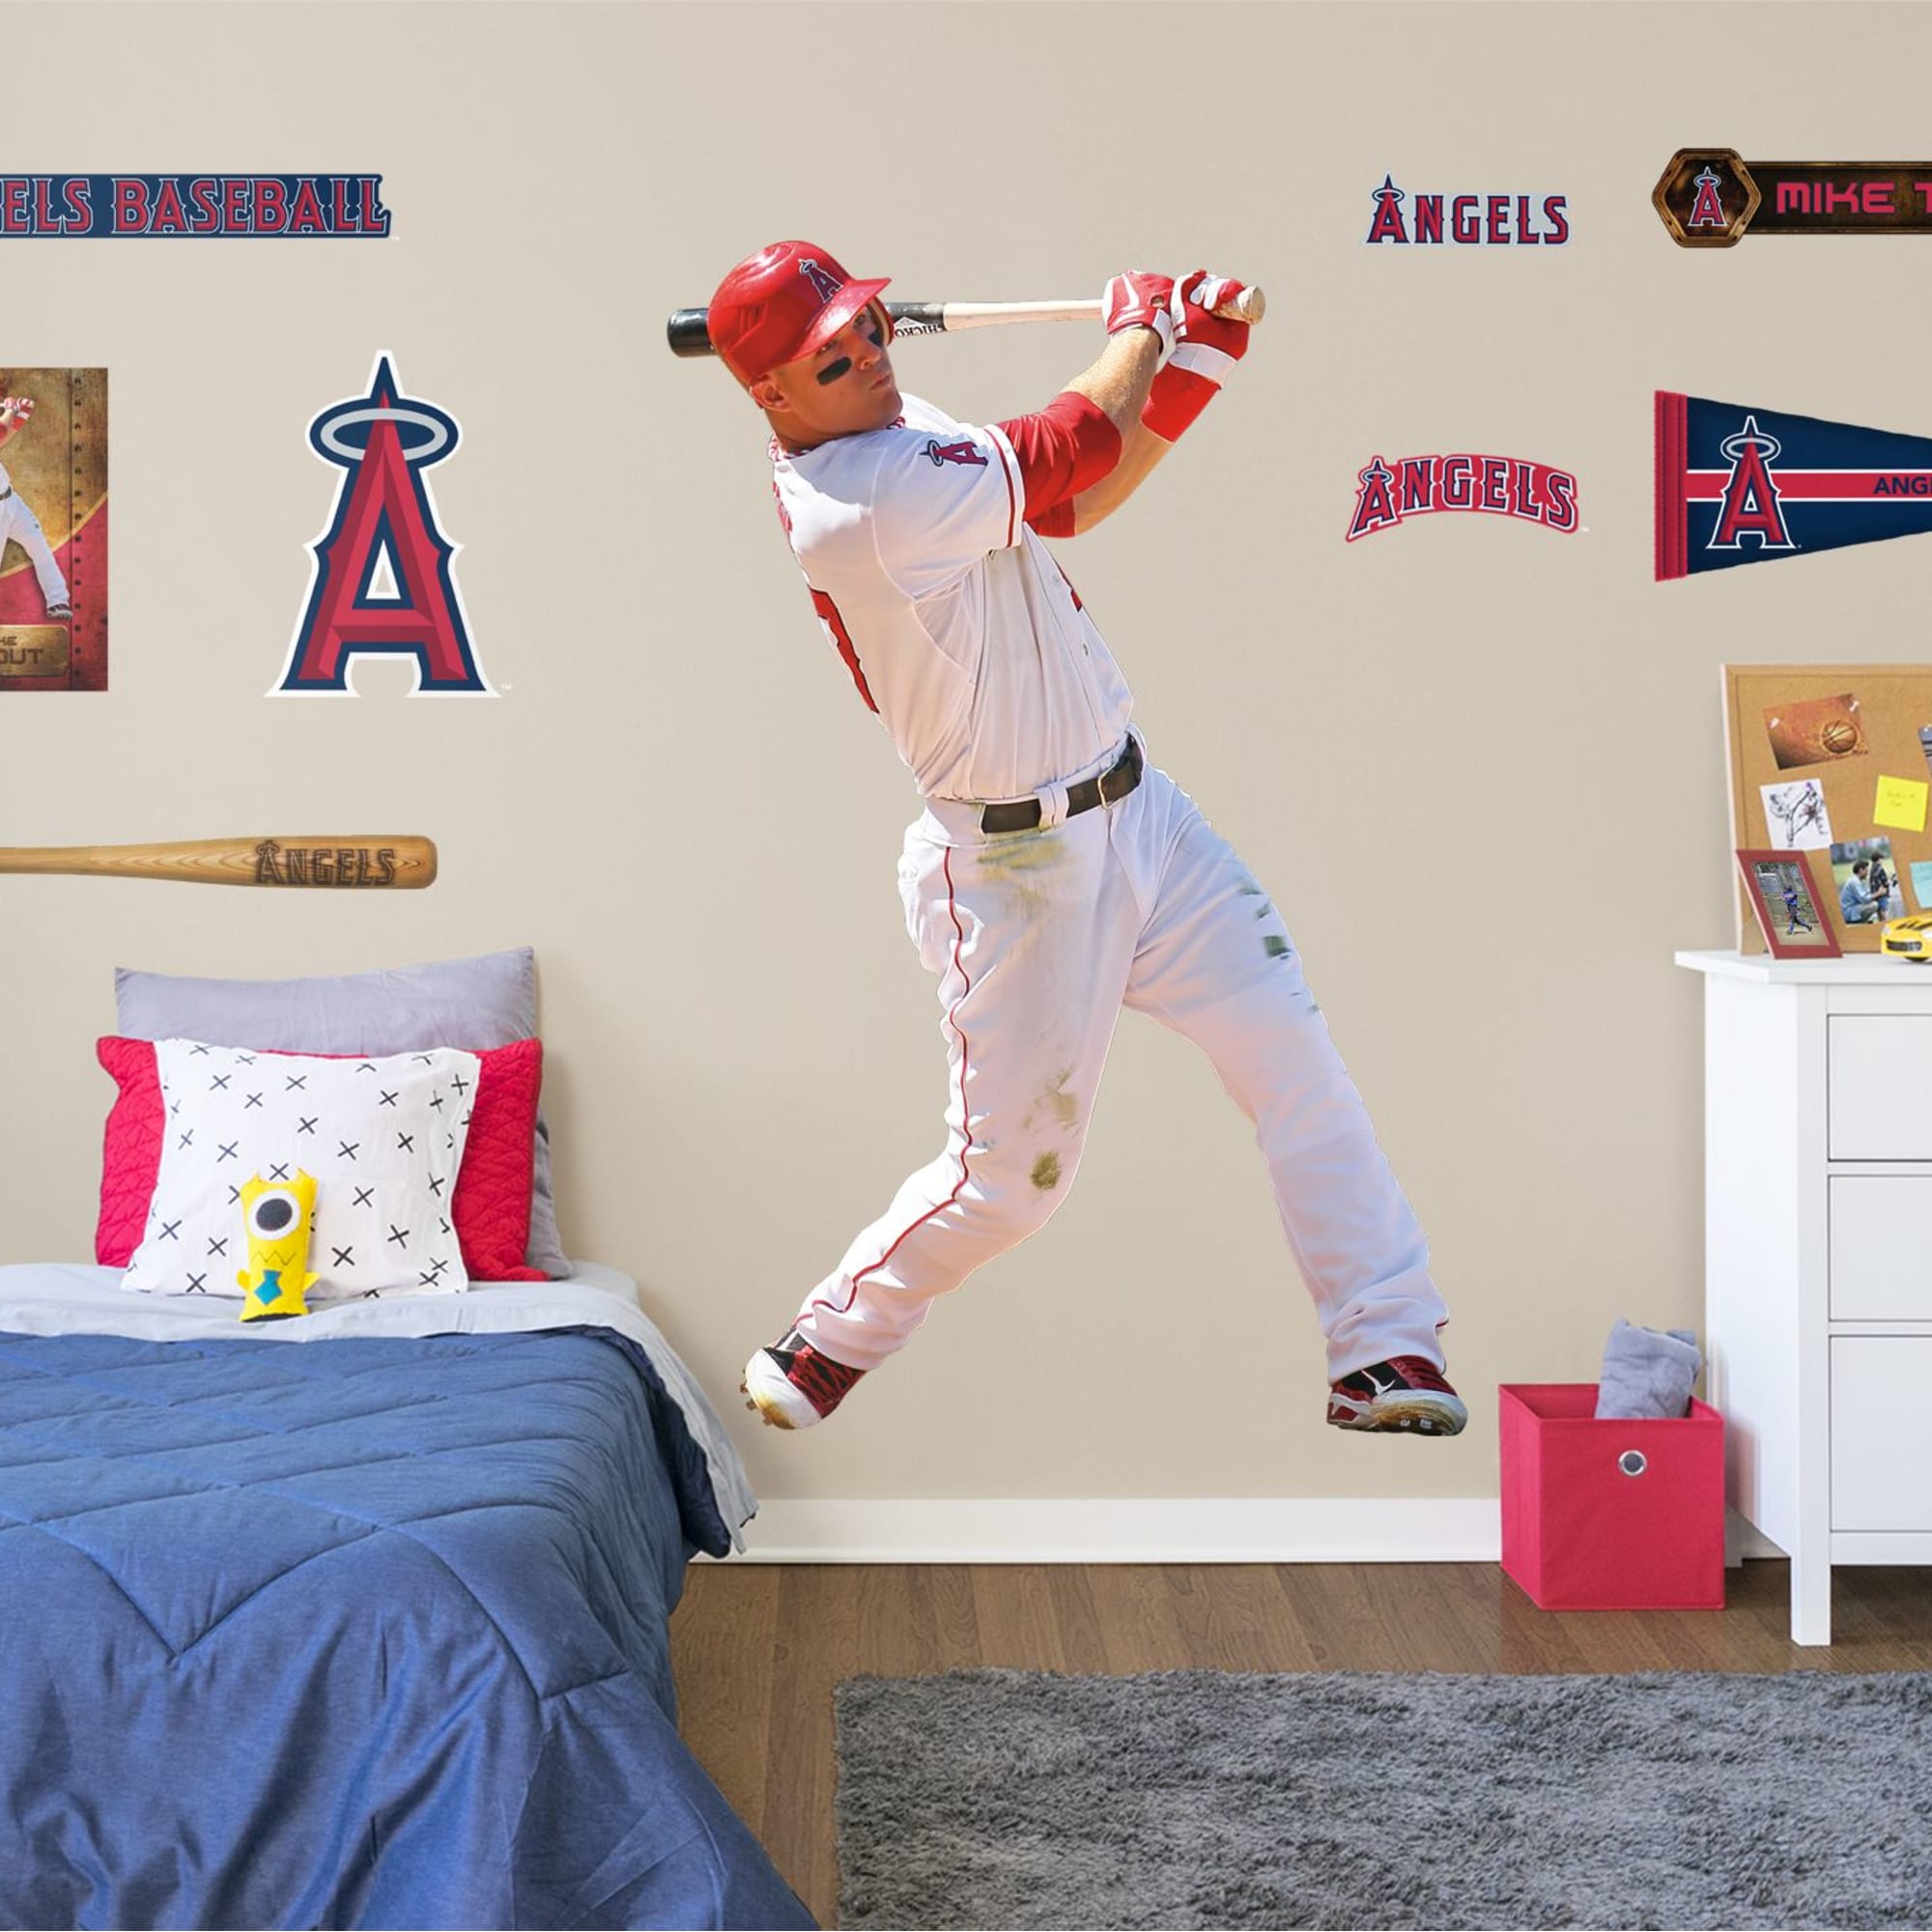 Mike Trout for LA Angels - Officially Licensed MLB Removable Wall Decal Life-Size Athlete + 9 Decals (51"W x 74"H) by Fathead |